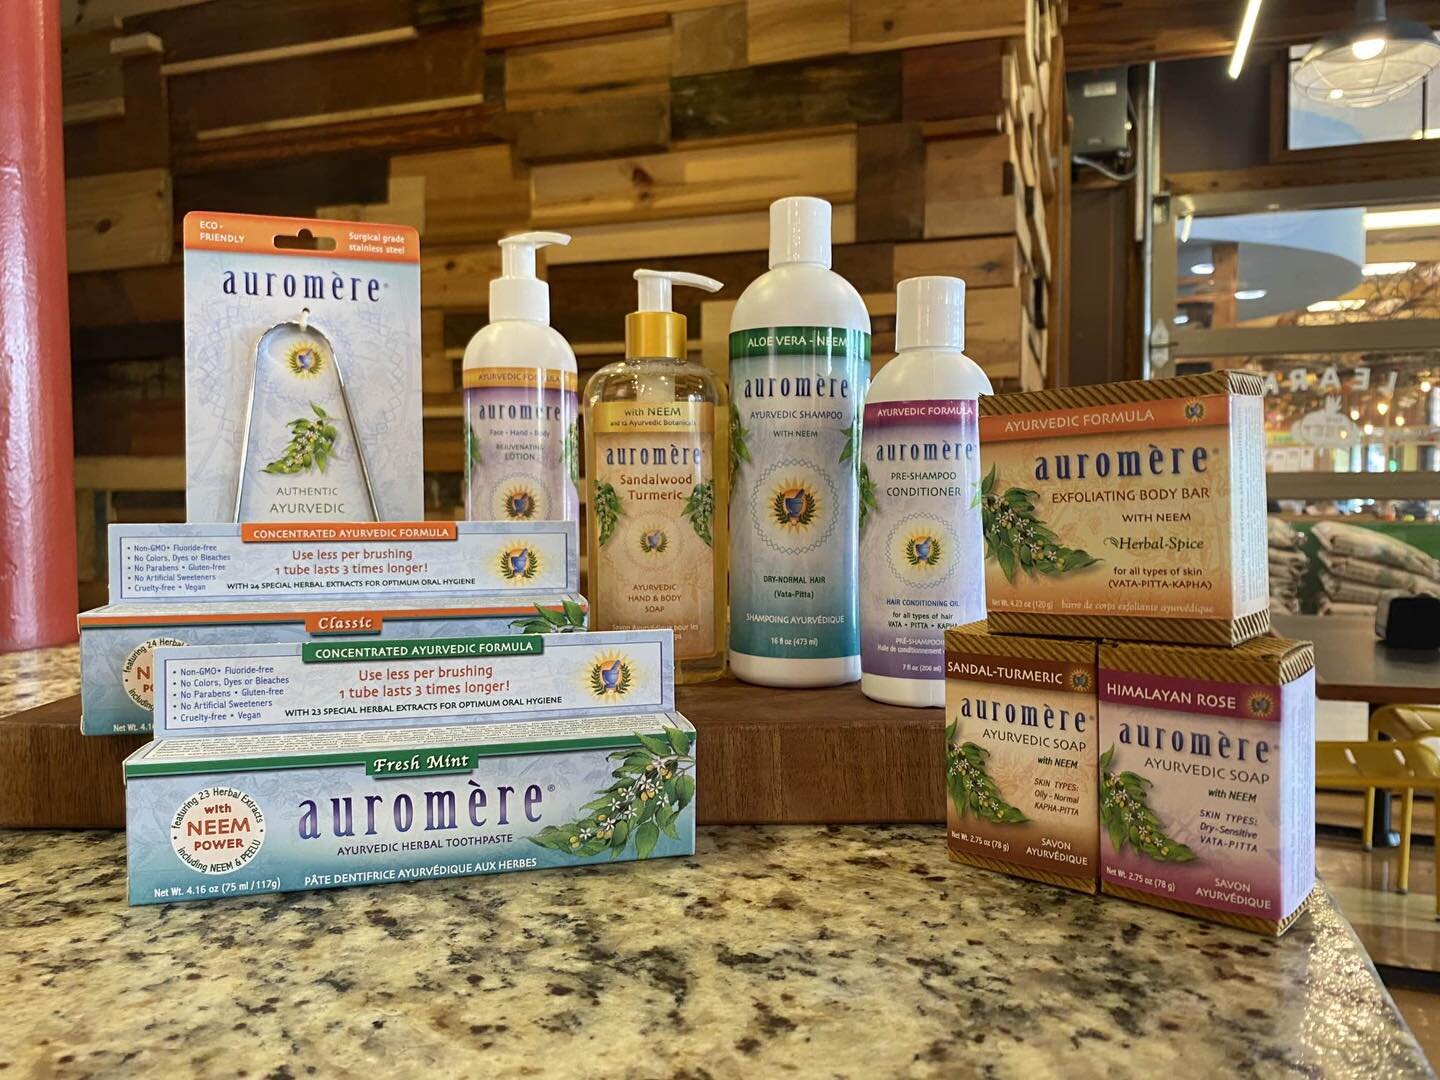 New Giveaway form Aurom&egrave;re! The first 20 people to mention this post get a free sample bag full of goodies! Just stop by the Nourish Department and mention it! 

Aurom&egrave;re is dedicated to bringing you pure, authentic, and effective Ayurv